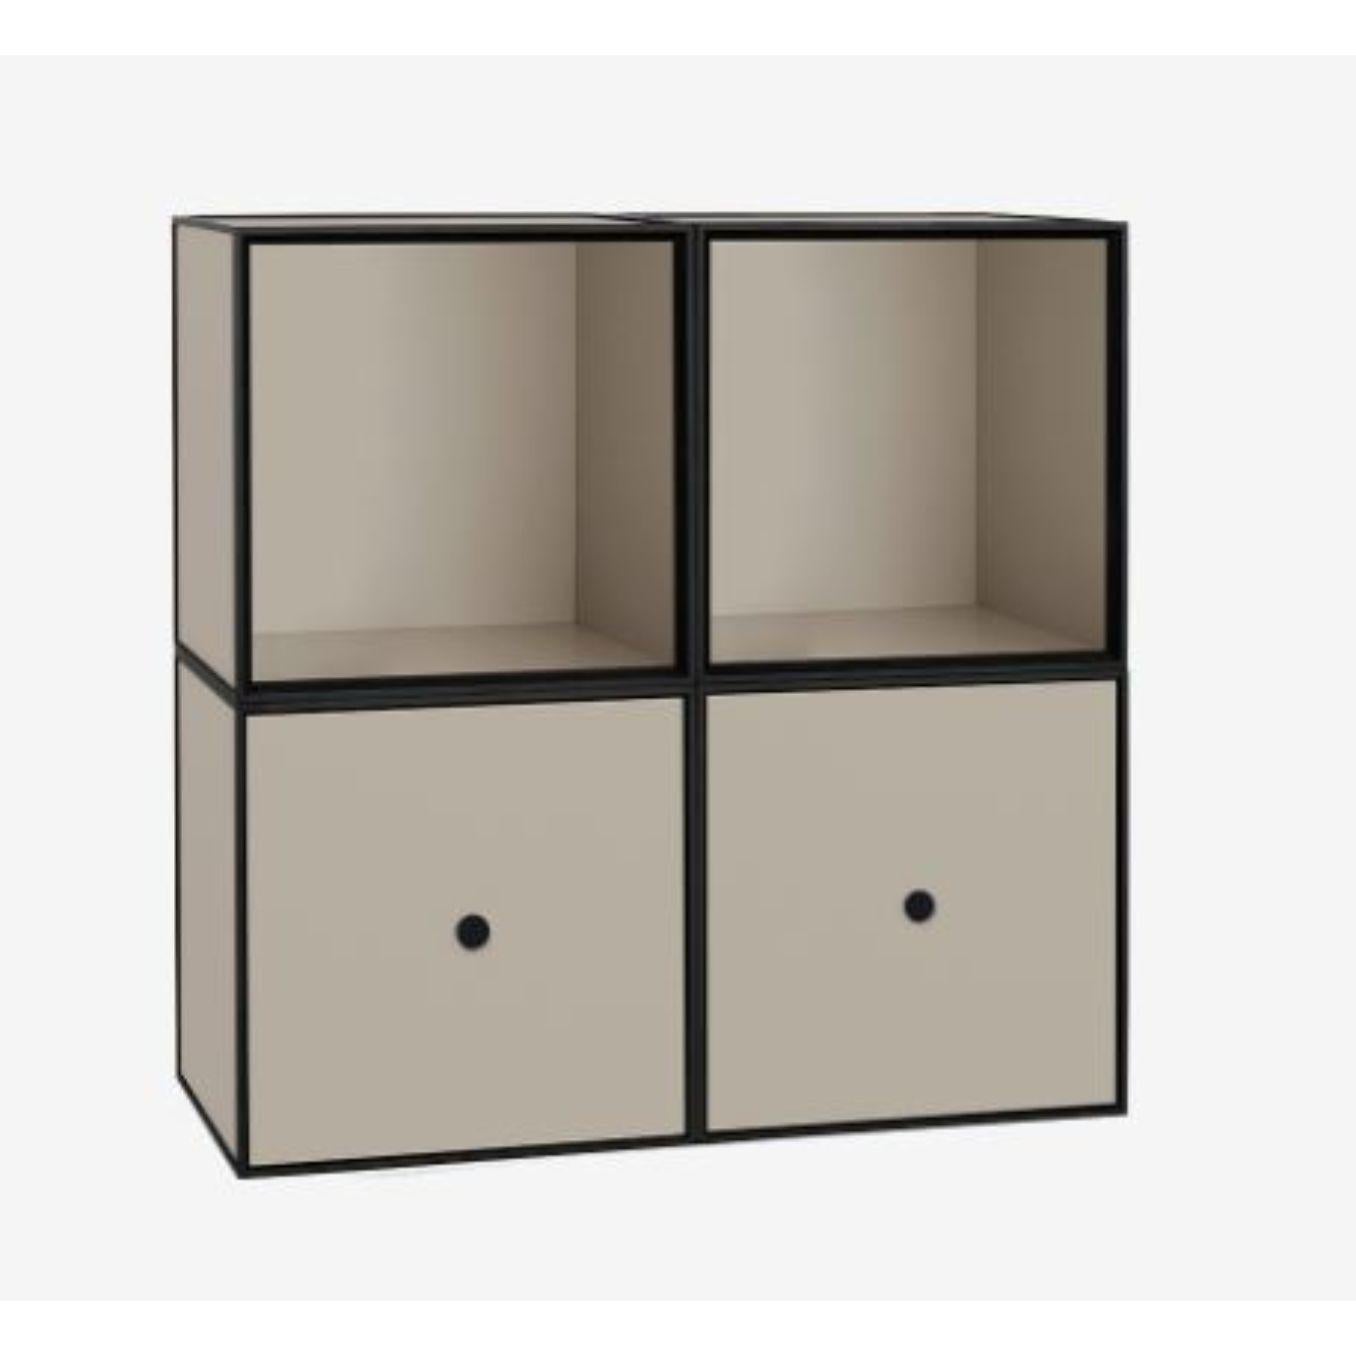 35 sand frame square standard box by Lassen
Dimensions: D 70 x W 35 x H 70 cm 
Materials: Finér, Melamin, Melamine, Metal, Veneer
Also available in different colours and dimensions.
Weight: 23.74 Kg

By Lassen is a Danish design brand focused